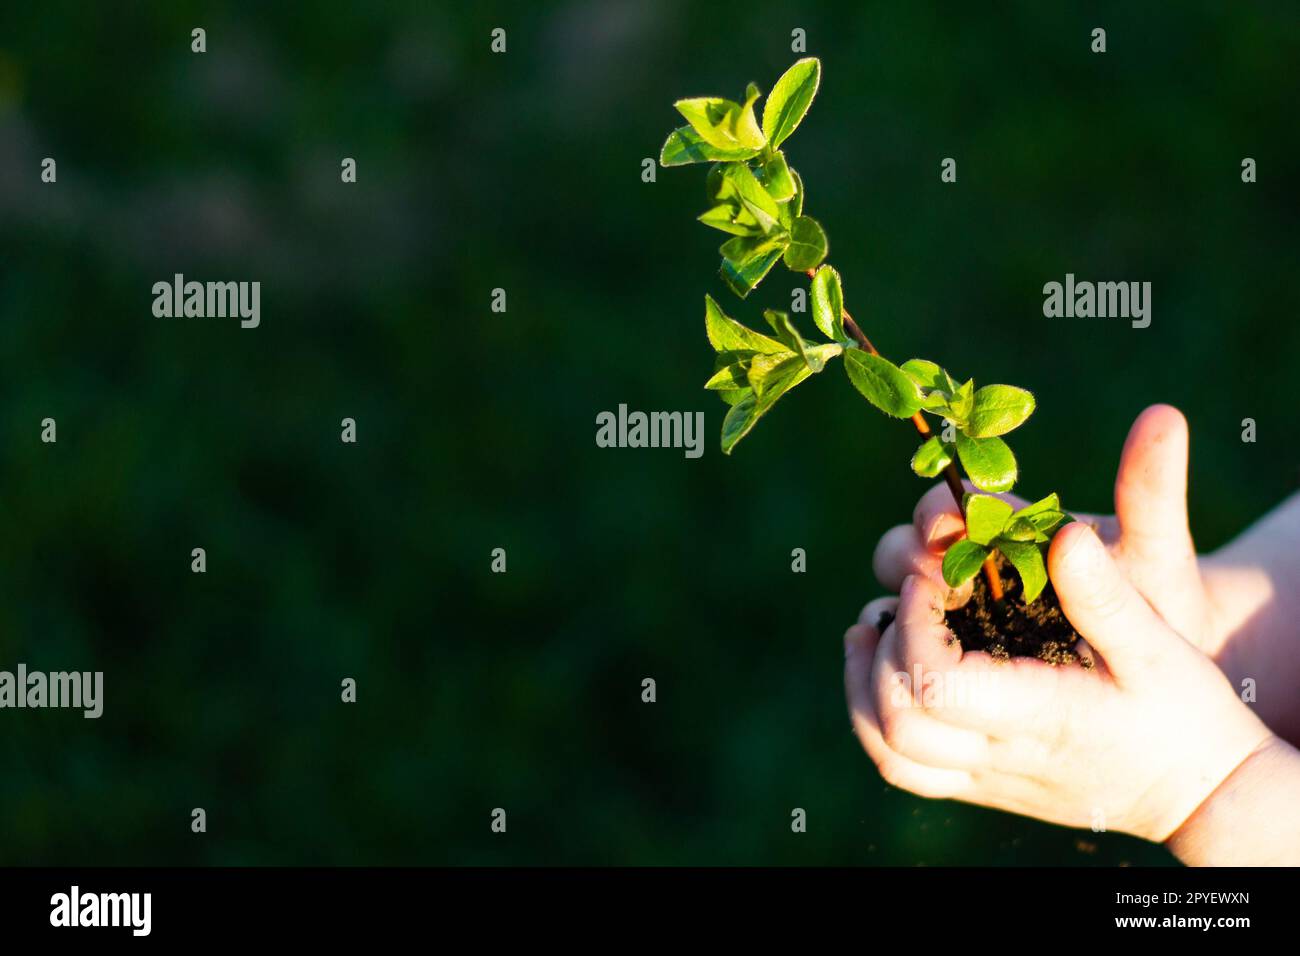 Earth Day. Sapling of a tree in a children's hands on a background of grass. Forest conservation concept. Stock Photo